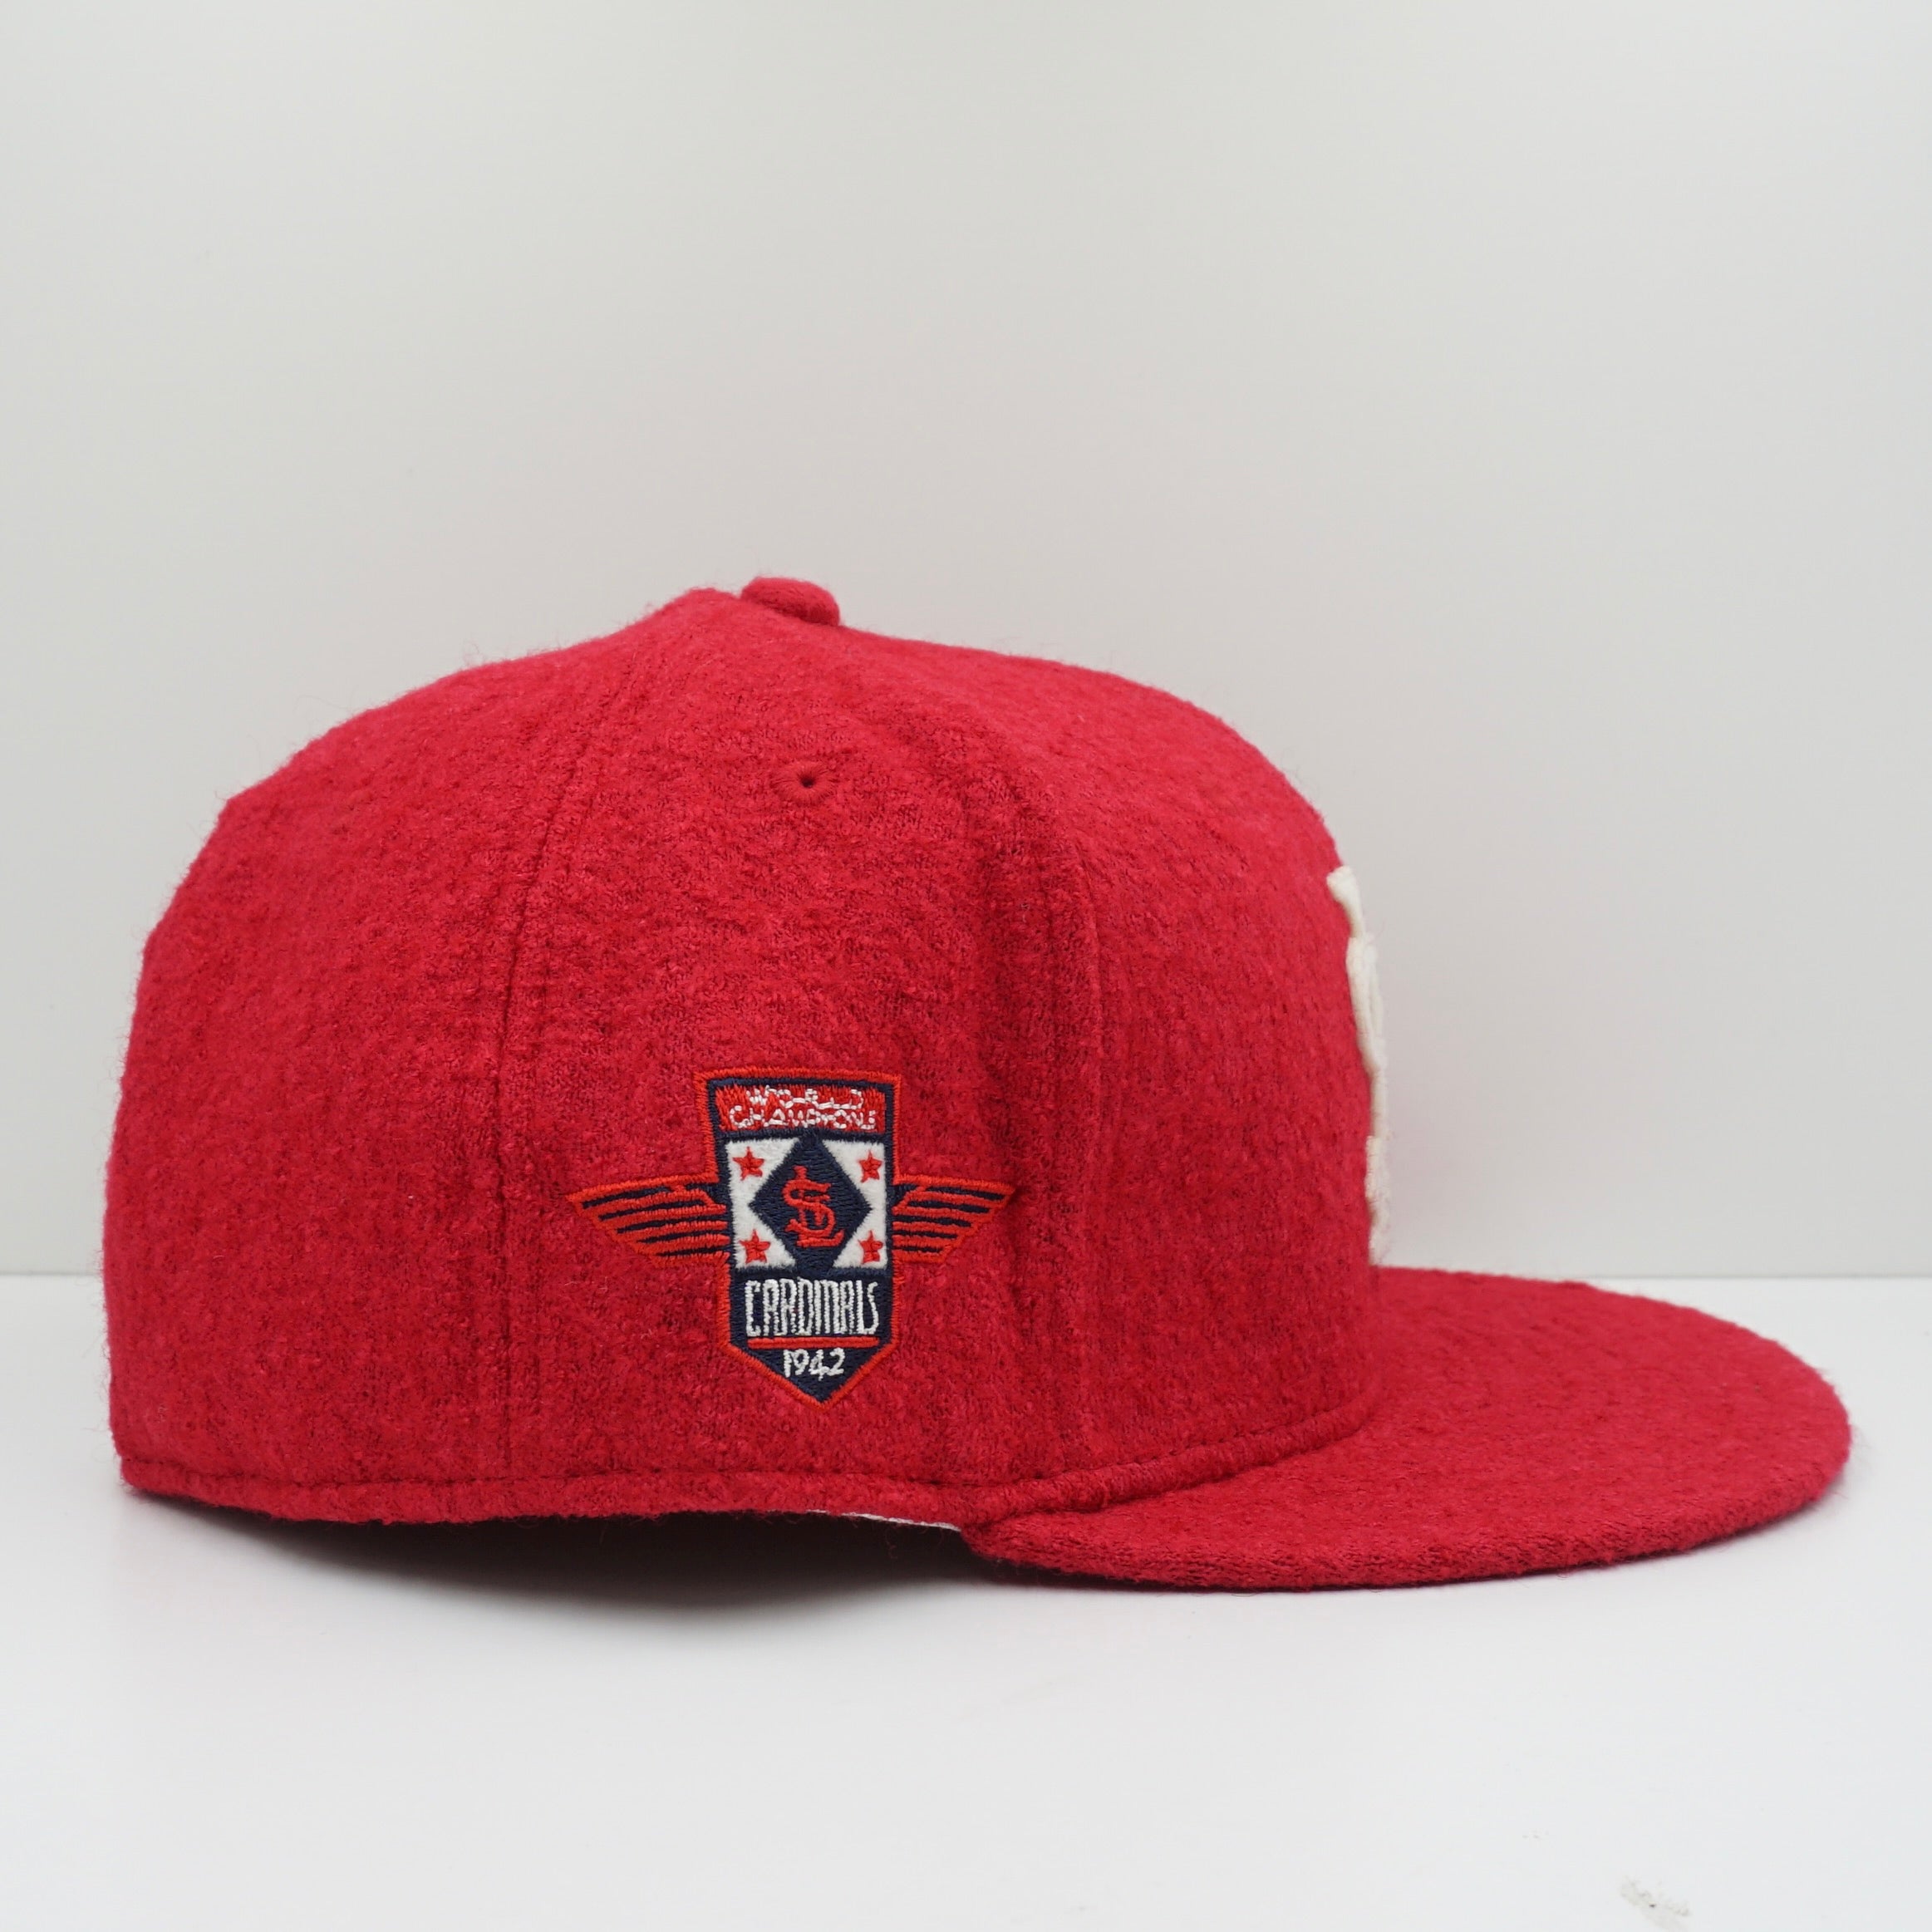 New Era Cooperstown St Louis Cardinals Rasberry Red Fitted Cap